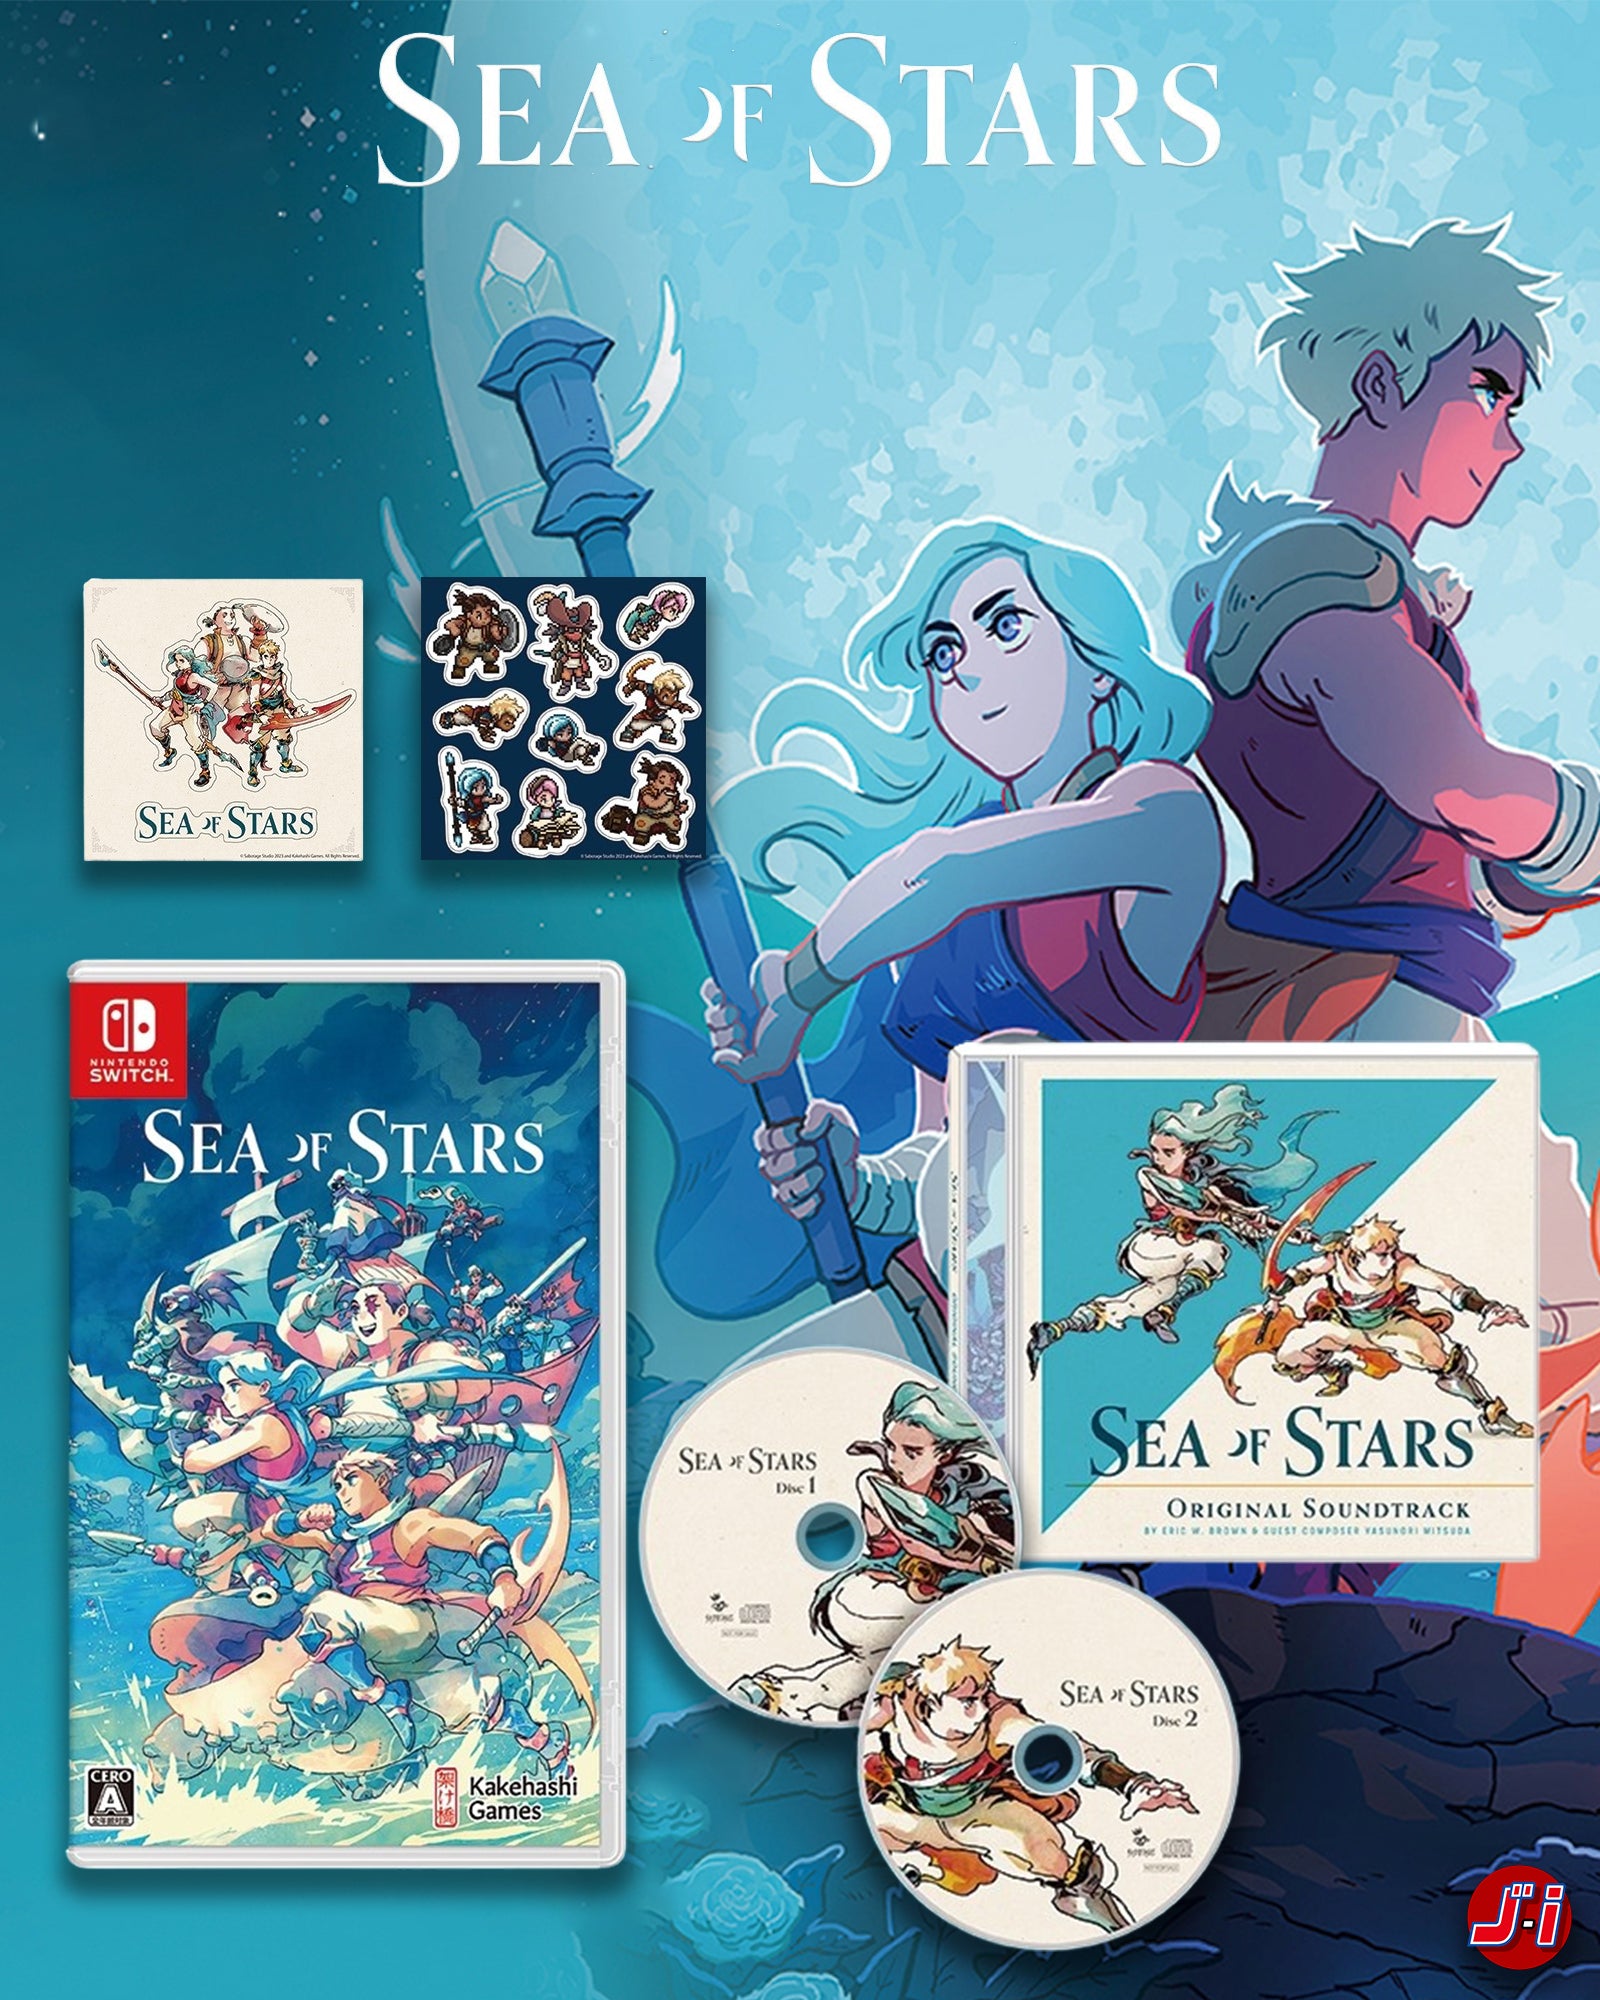 SEA OF STARS COLLECTOR EDITION SWITCH - ORIGINAL SOUNDTRACK 2 CDS - 2 TYPES OF STICKER SHEETS